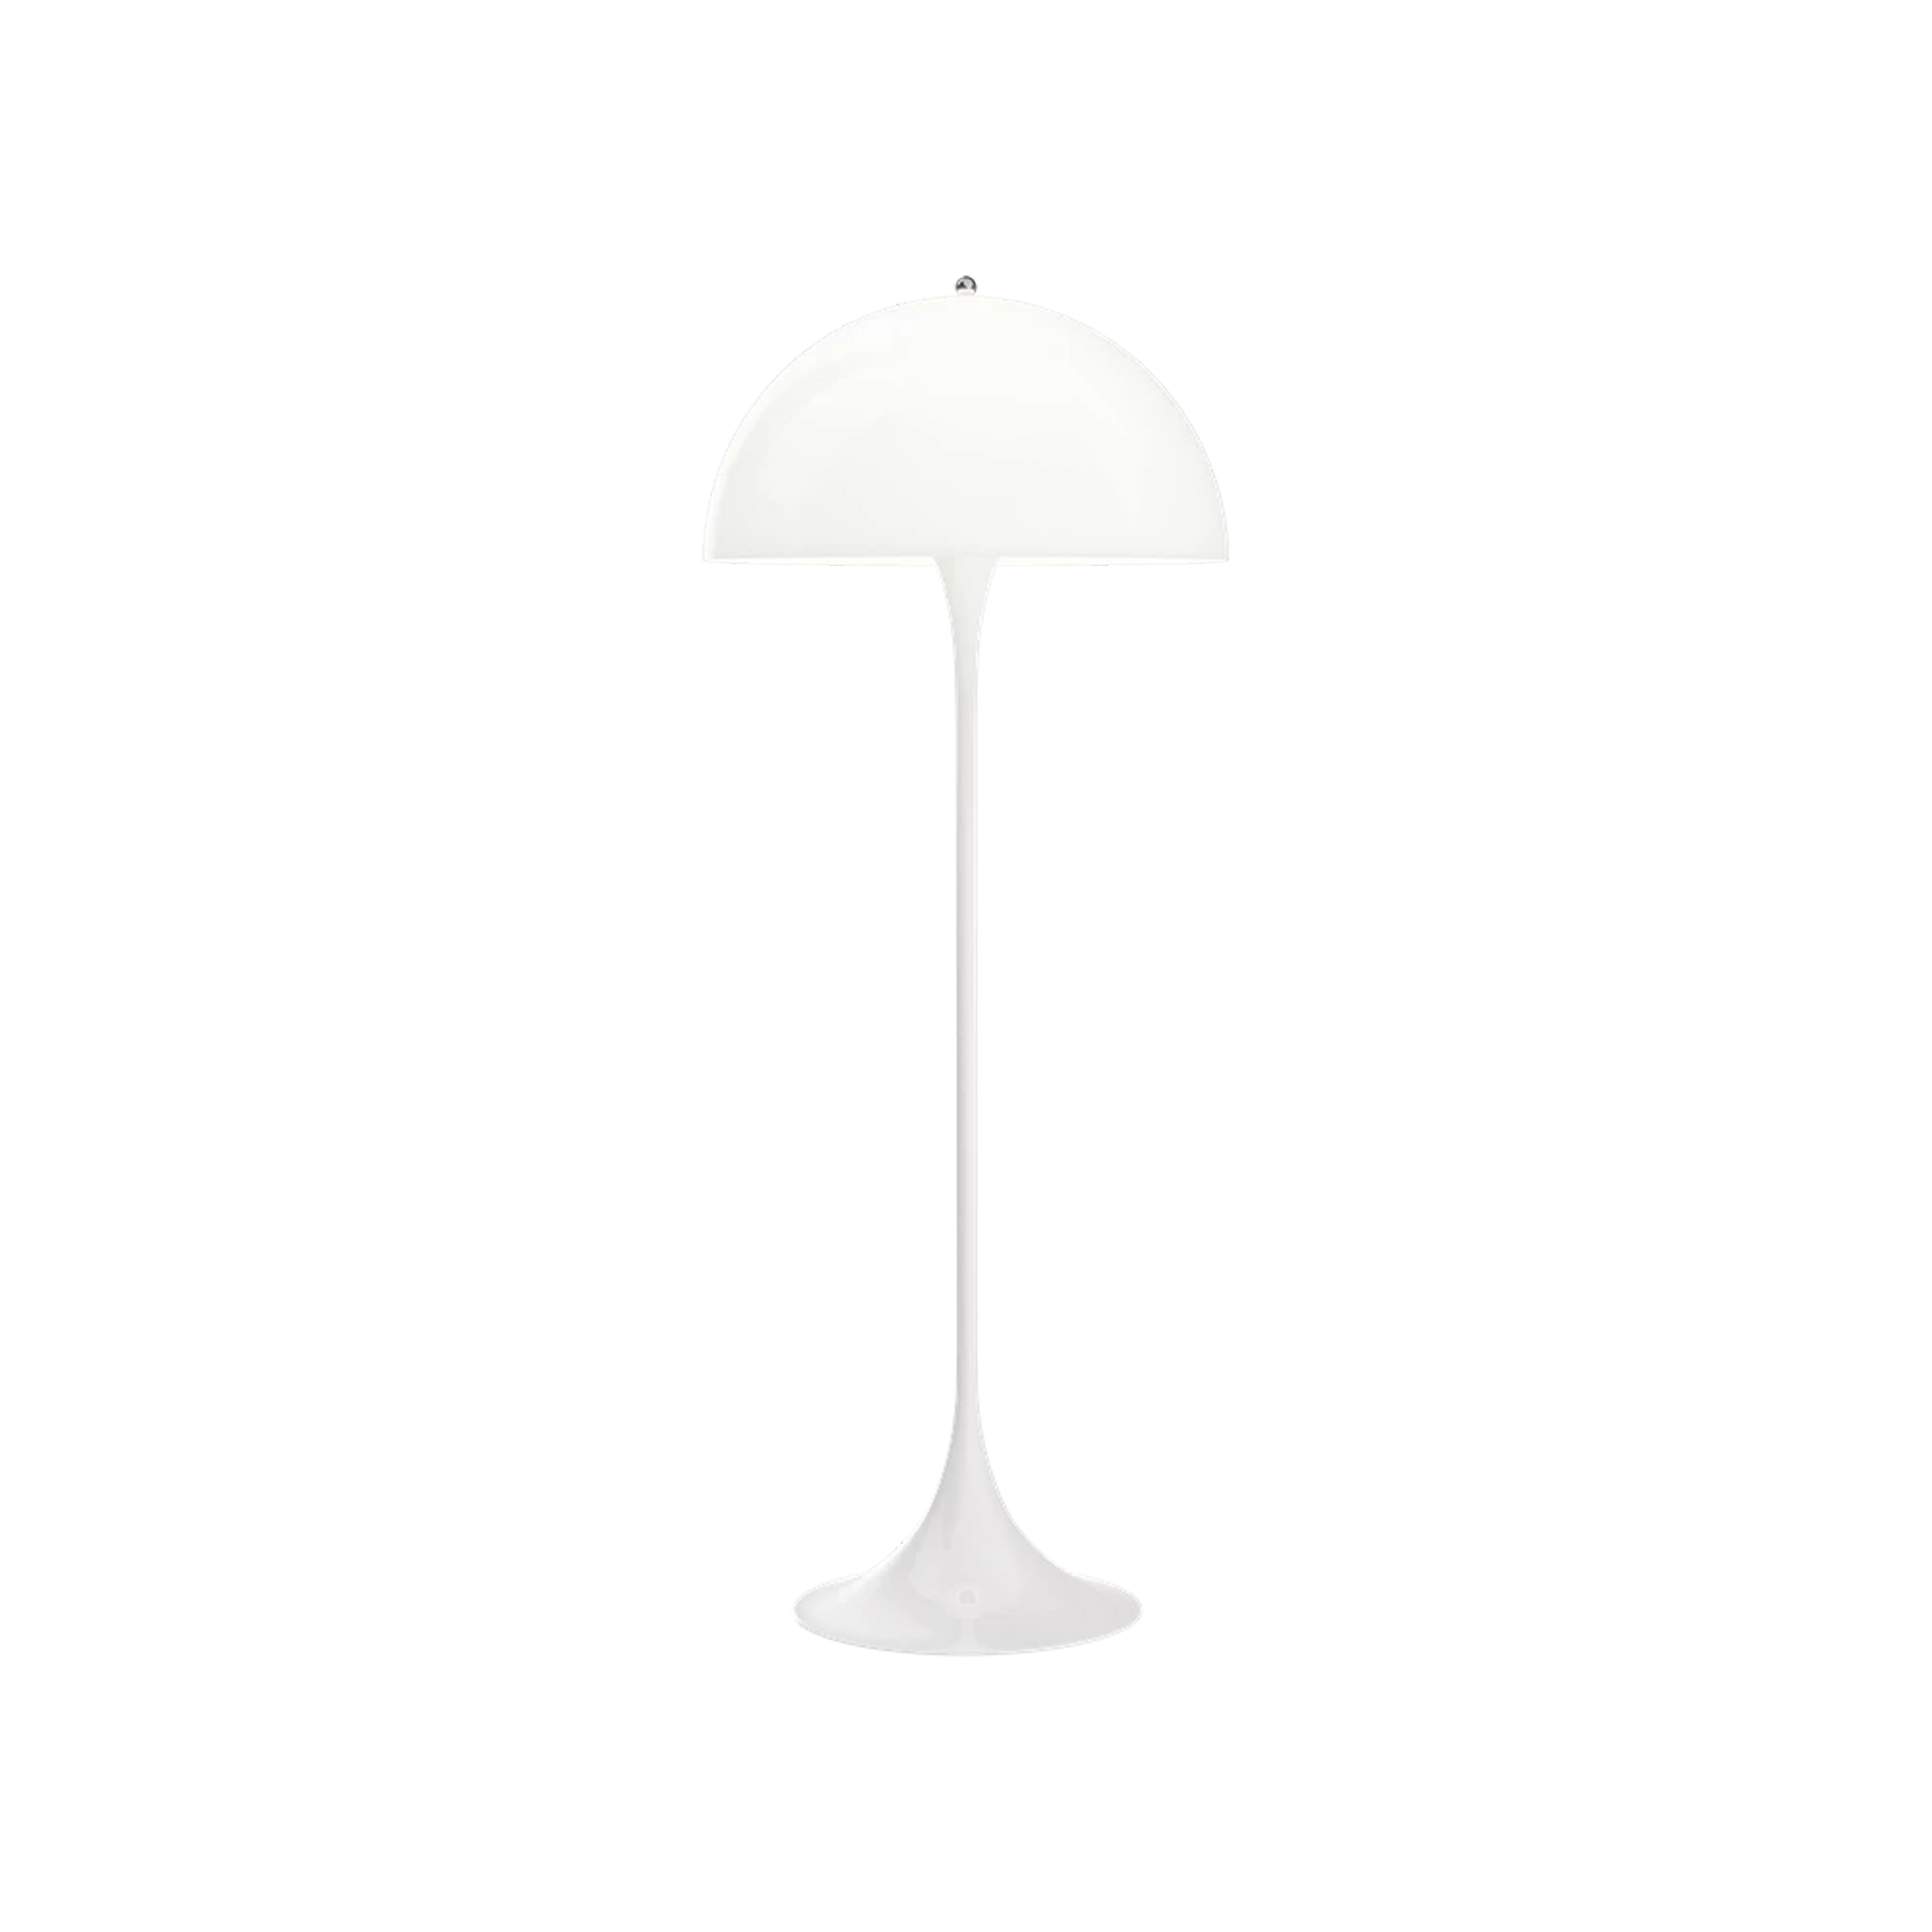 A design masterpiece conceived by Verner Panton in 1971, the Panthella Floor Lamp exudes timeless elegance with its organic trumpet-like shade and seamless hemispherical acrylic de